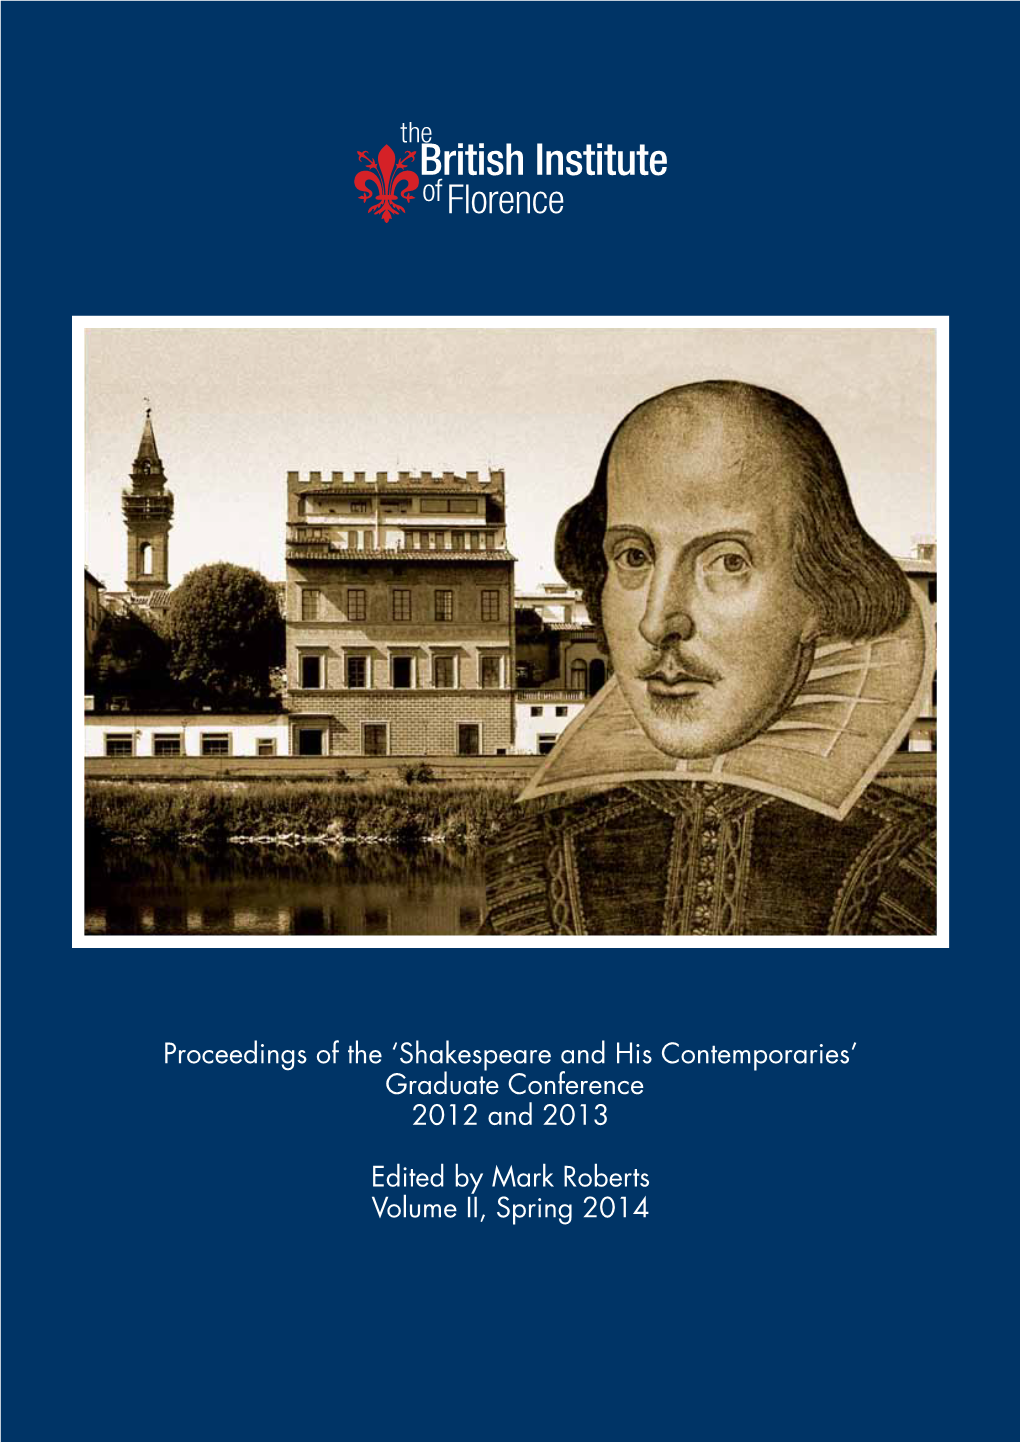 Proceedings of the 'Shakespeare and His Contemporaries' Graduate Conference 2012 and 2013 Edited by Mark Roberts Volume